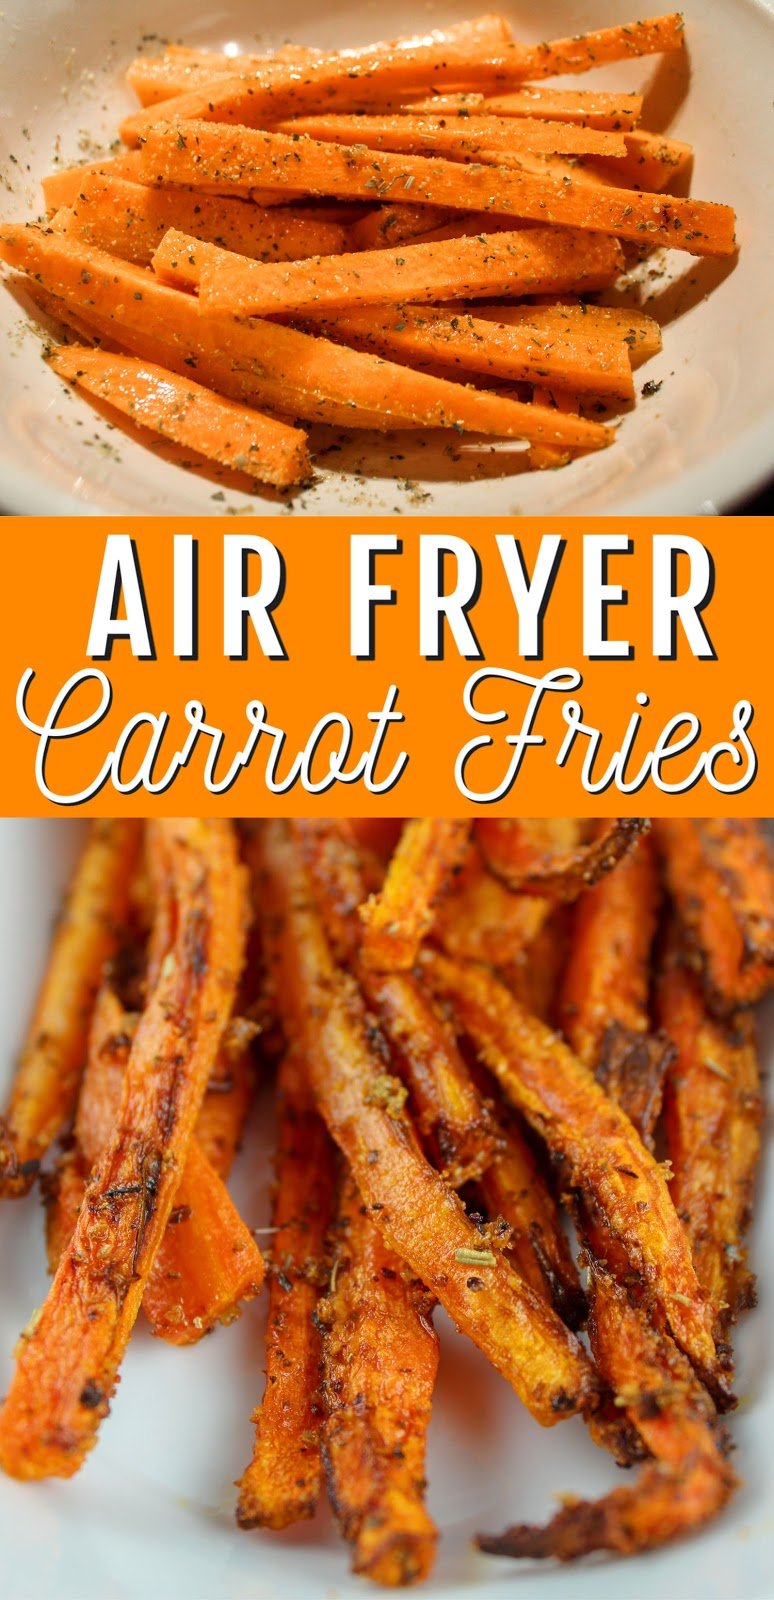 Roasted carrots are great – but they take time – UNLESS you’re making them in your air fryer! These air fryer carrot fries are a tasty and quick side dish for any meal!
 via @foodhussy